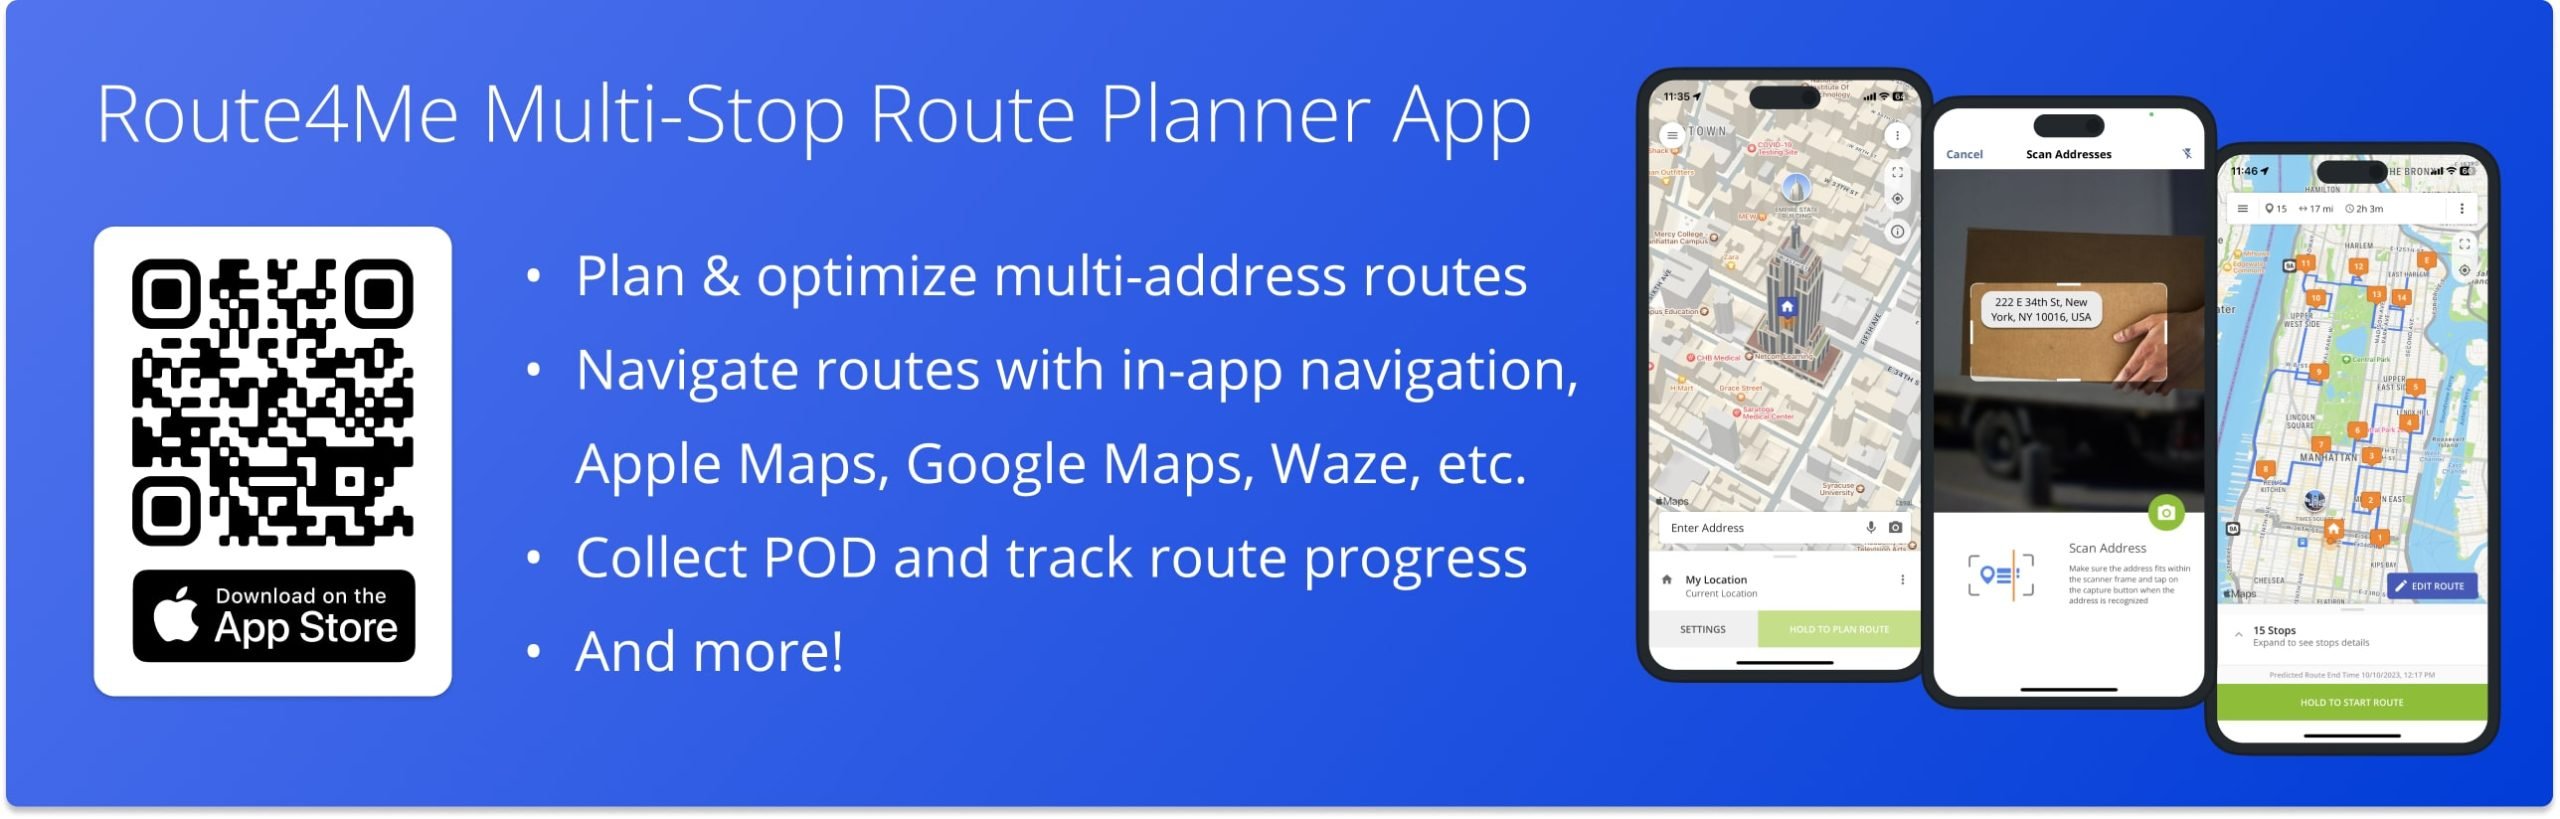 Download Route4Me multi-stop route planner app with in-app route navigation.